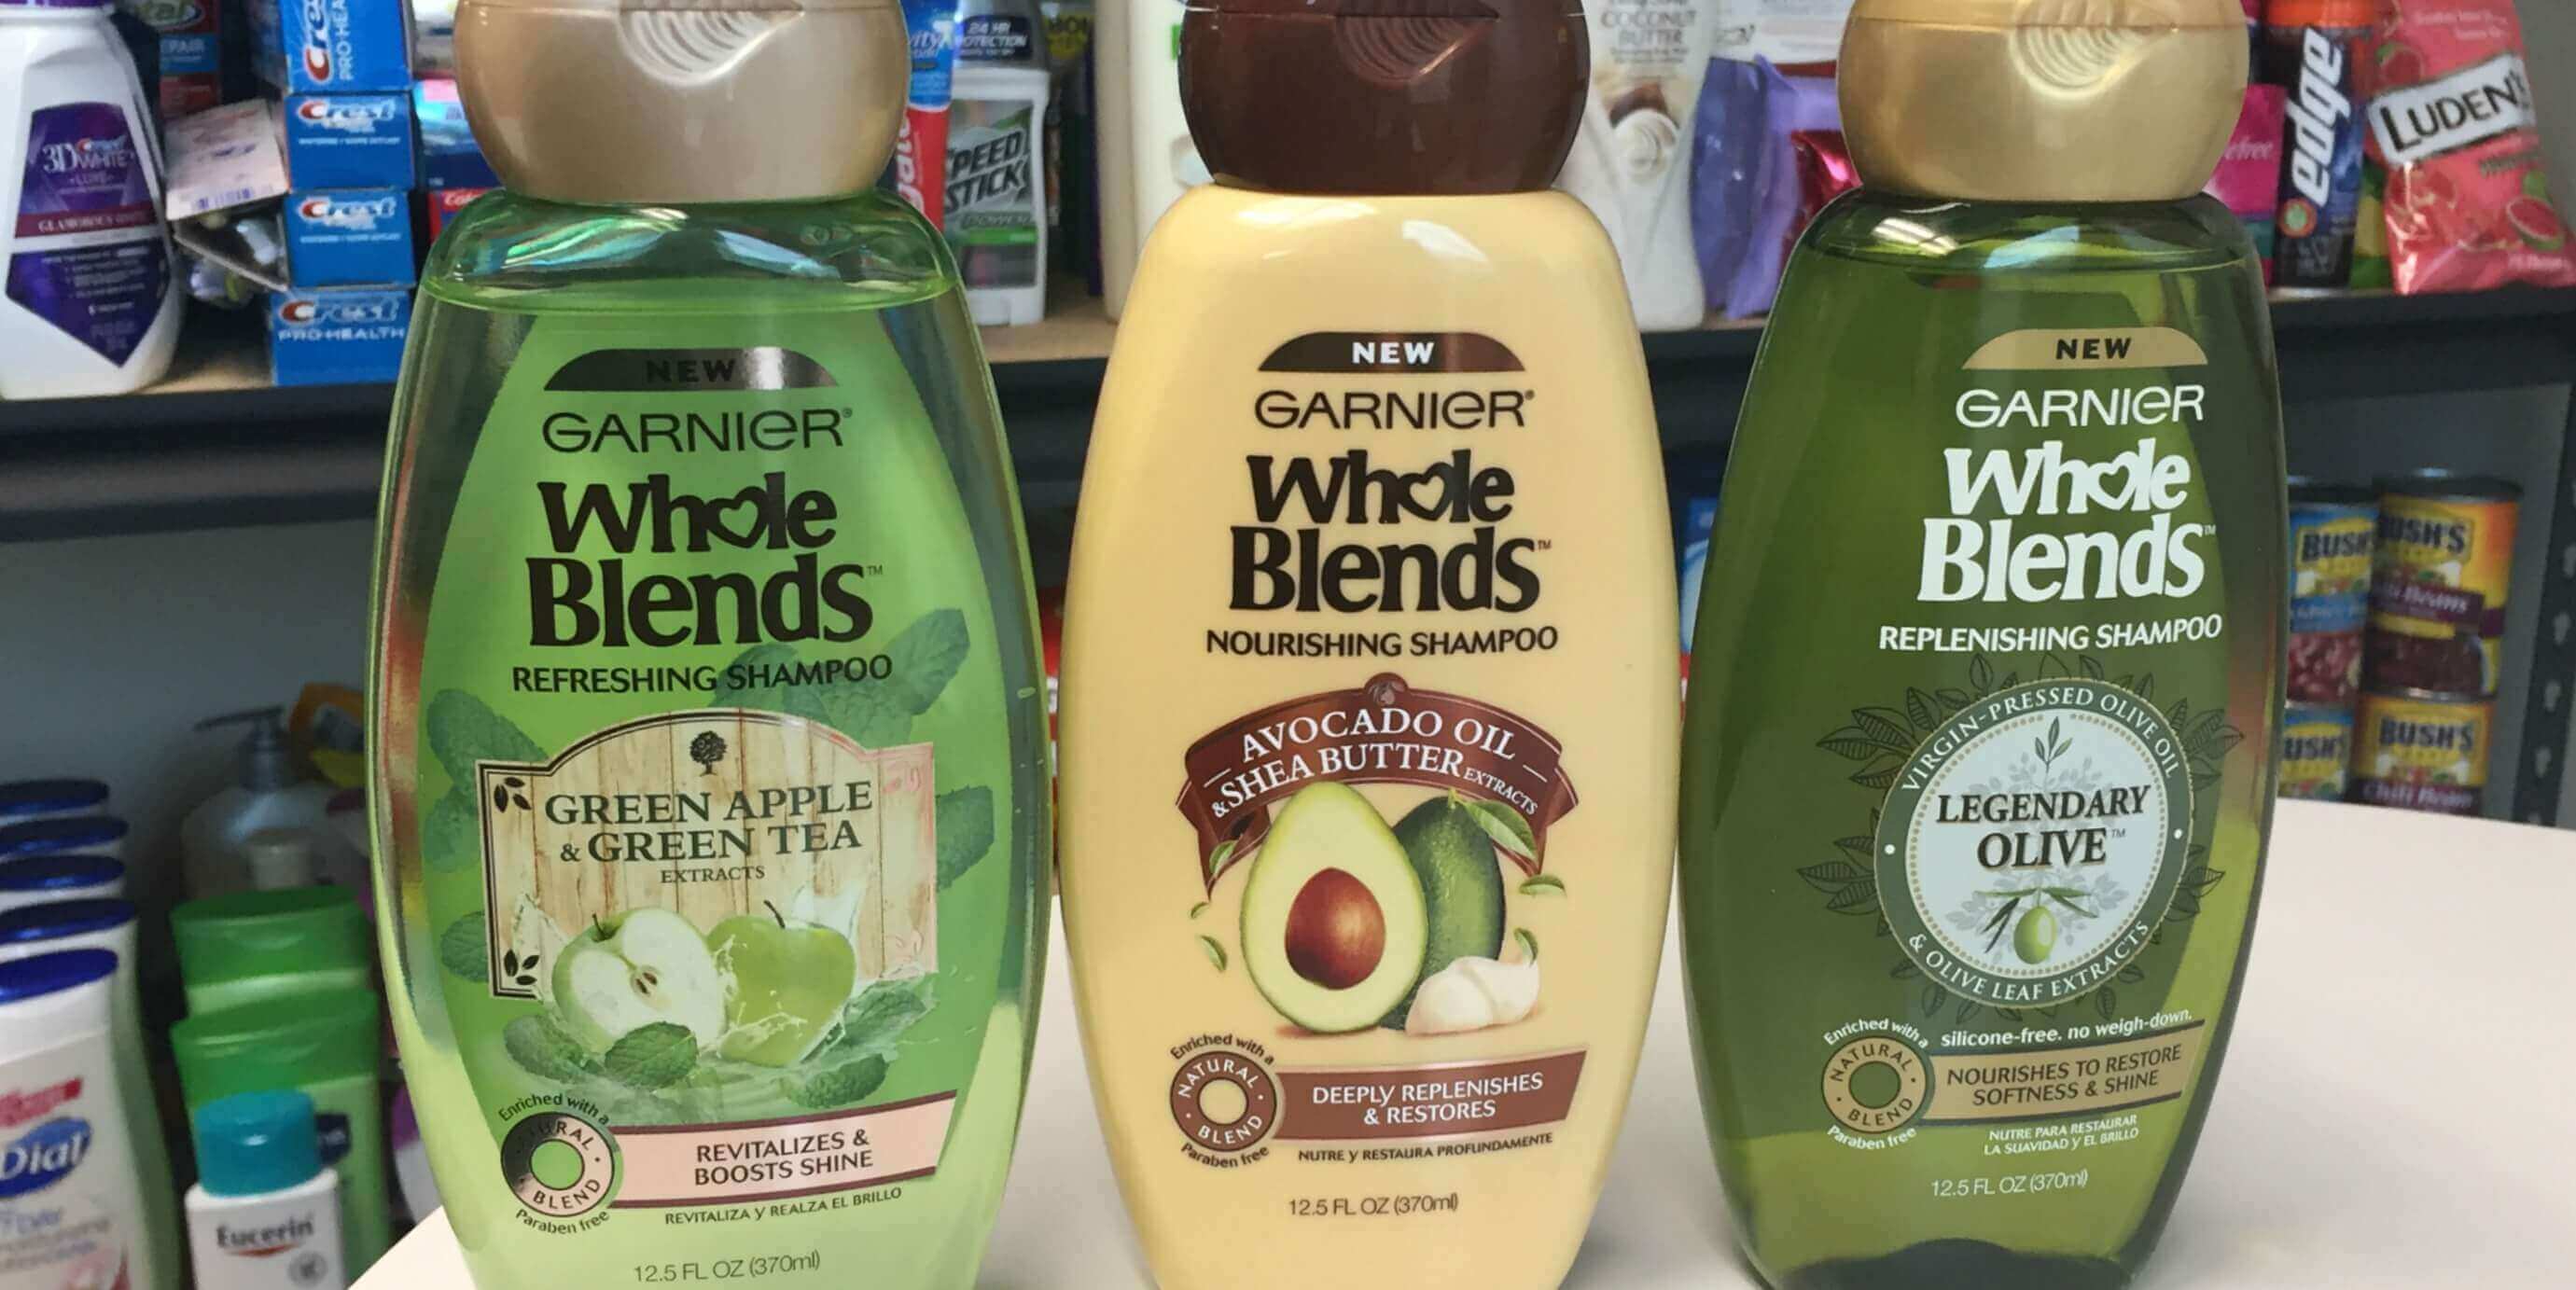 Garnier Whole Blends Coupons February 2019